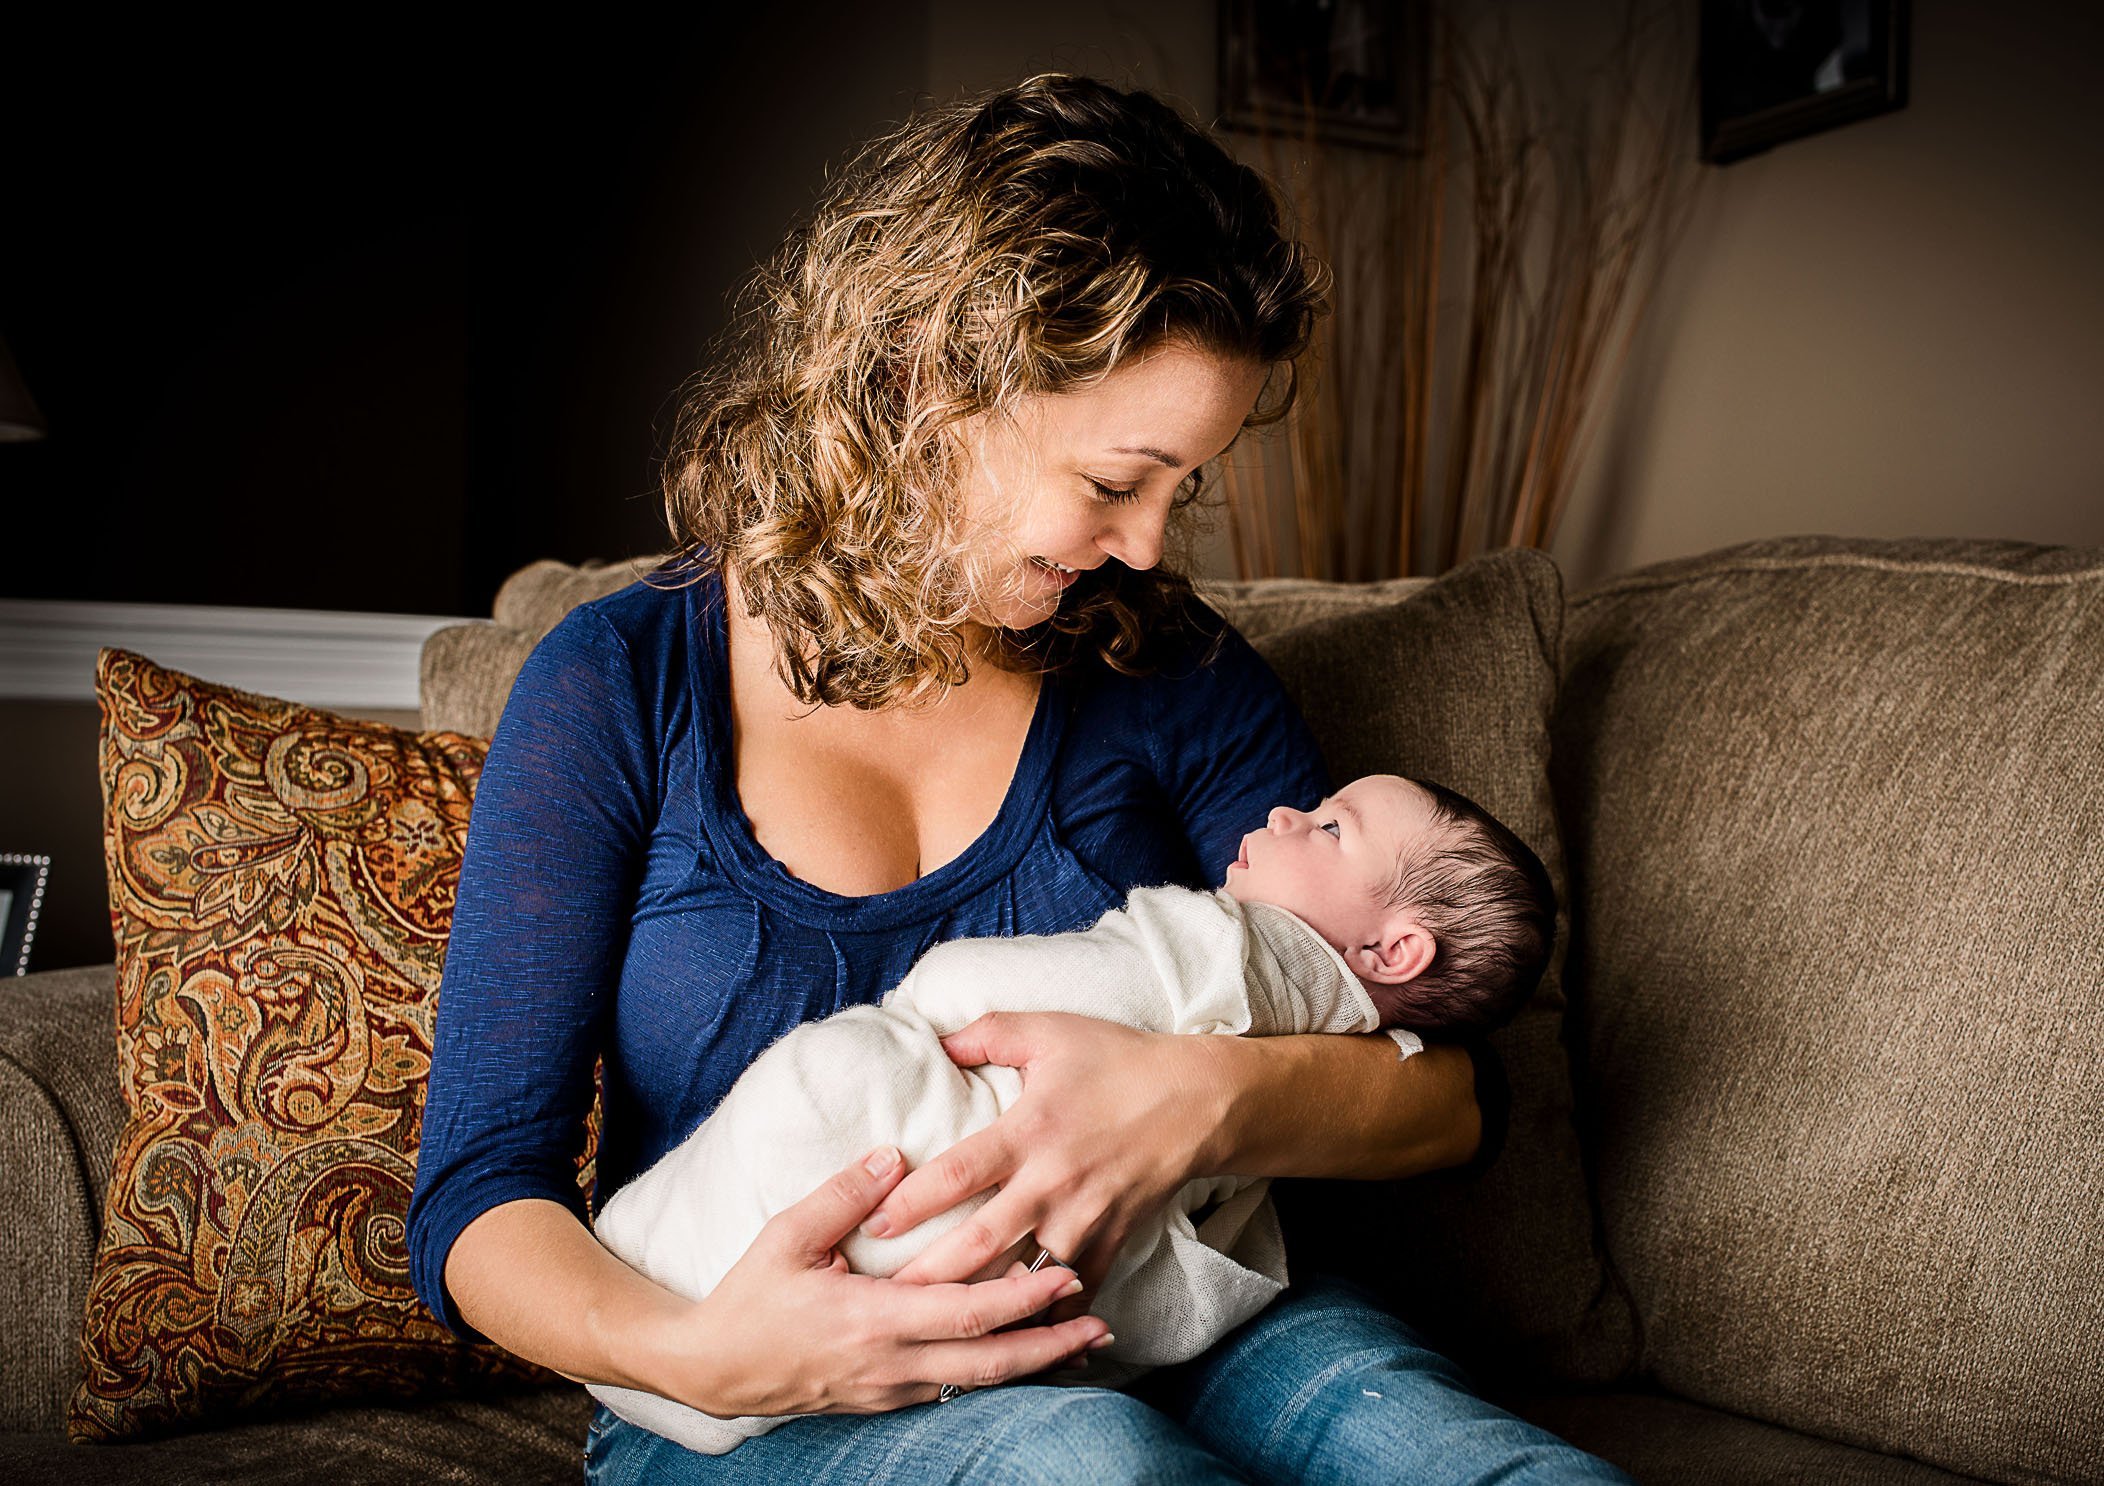 Momma holding newborn baby girl wrapped in her arms smiling One Big Happy Photo Amber Sehrt